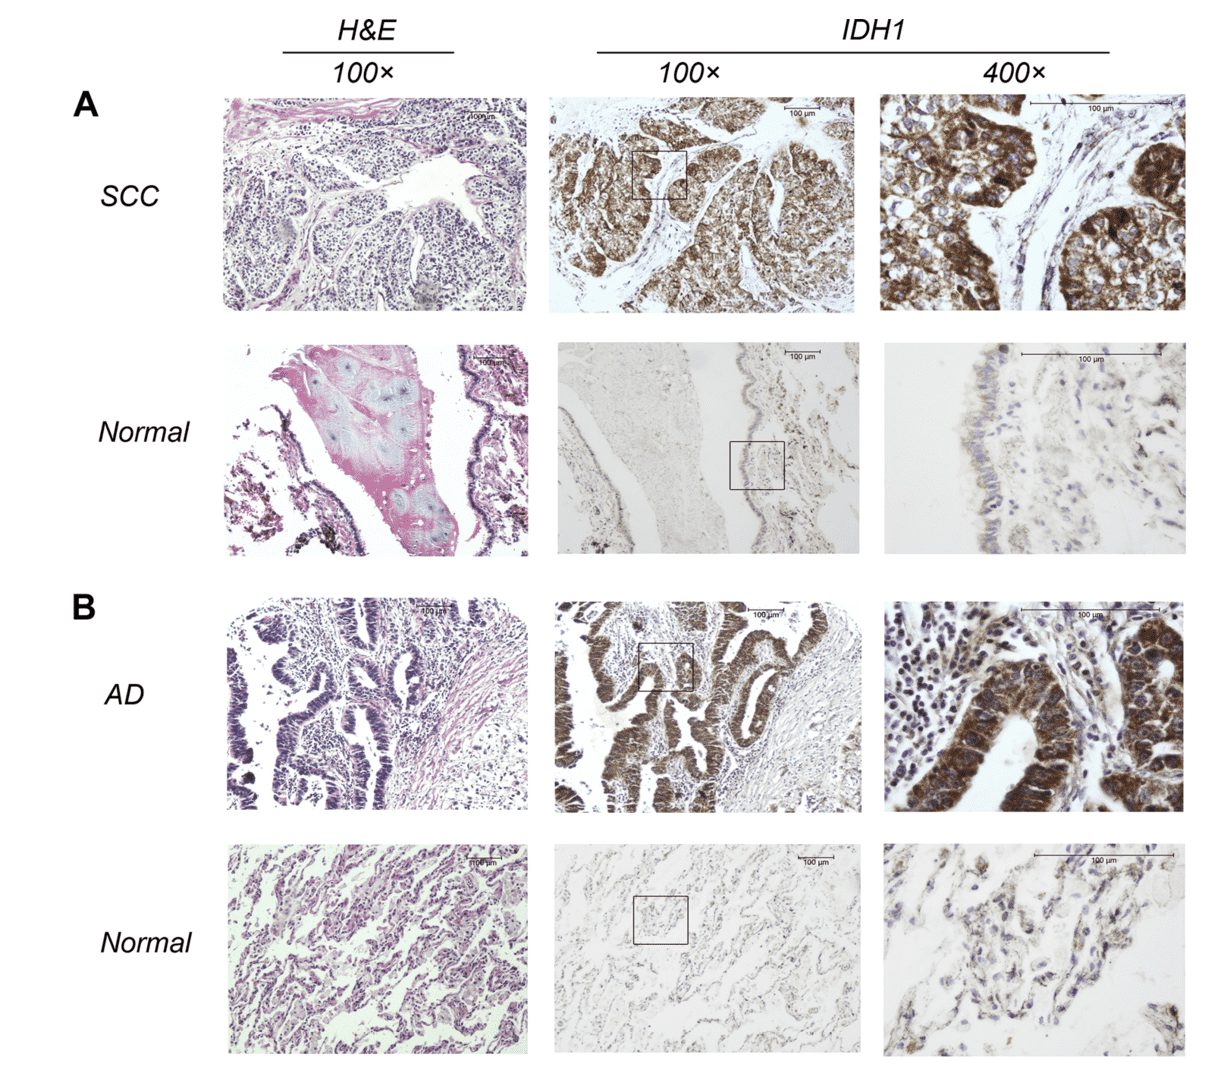 Immunohistochemical staining against IDH1 in tumors of both squamous cell carcinoma.